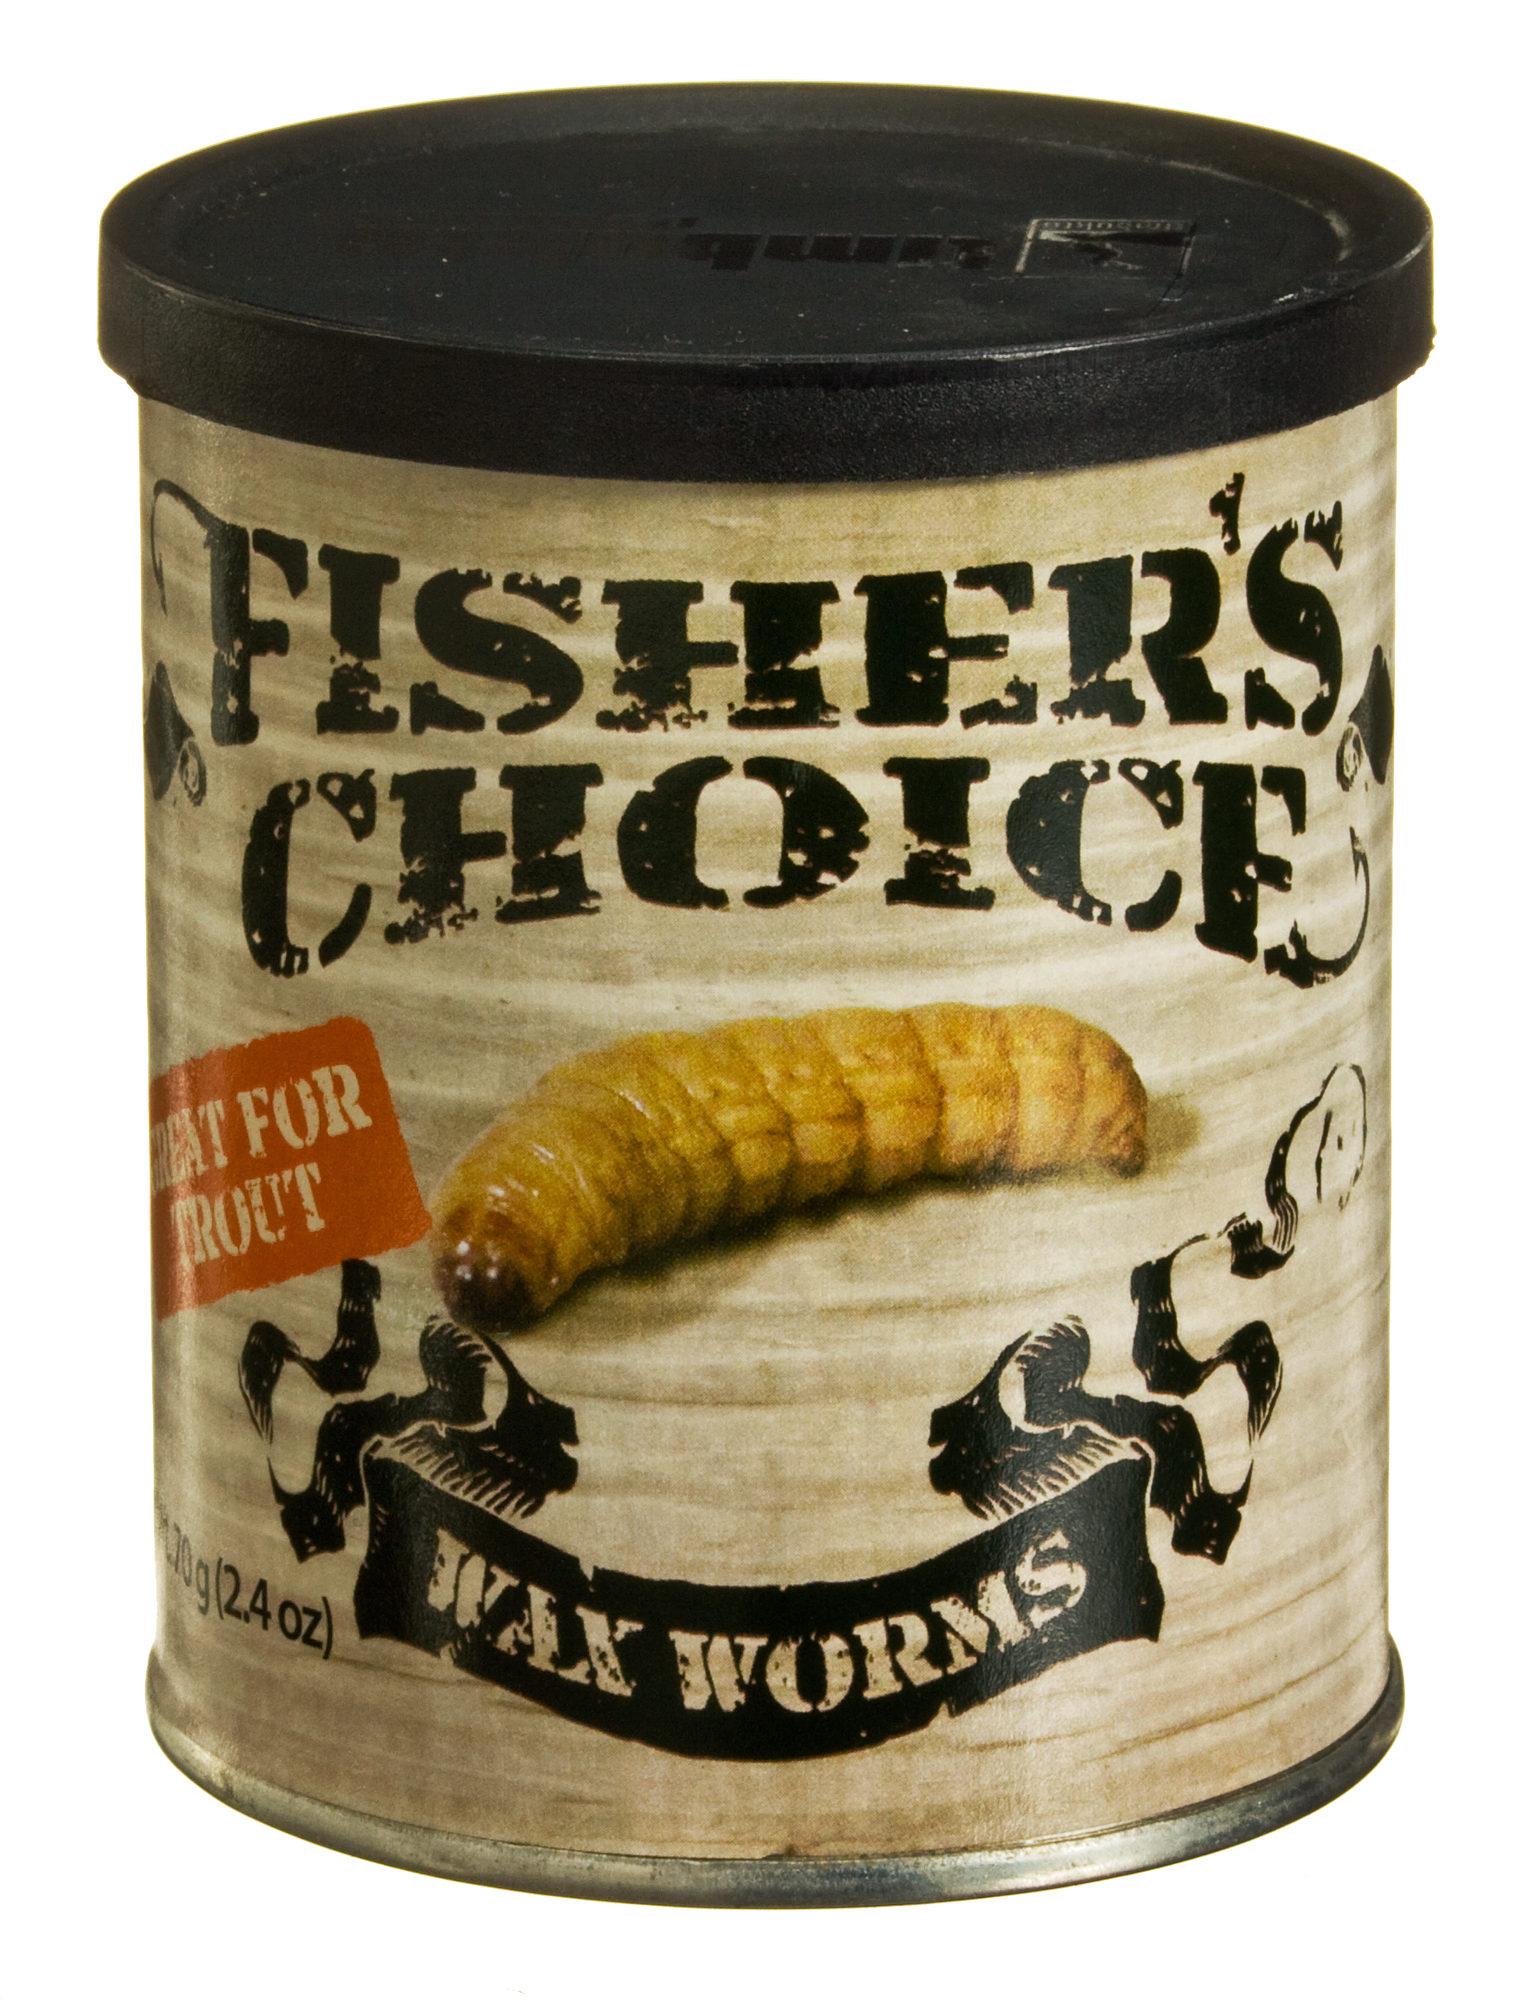 Fisher's Choice Wax Worms - Canned Bait